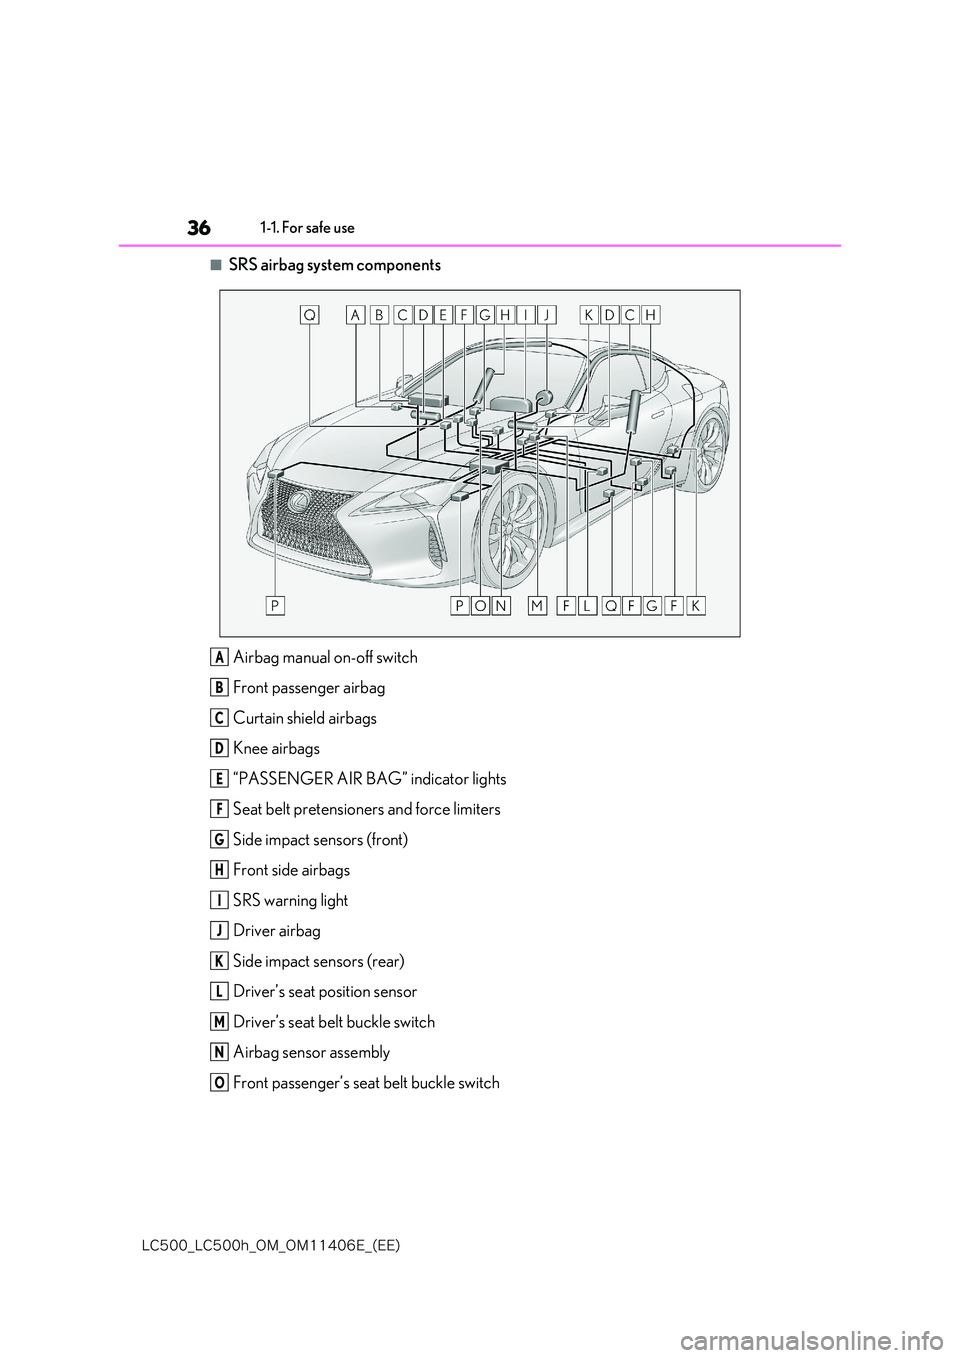 lexus LC500 2018  Owners Manual 36
�-�$����@�-�$����I�@�0�.�@�0�.������&�@�	�&�&�

1-1. For safe use
■SRS airbag system components 
Airbag manual on-off switch 
Front passenger airbag
Curtain shield airbags
Knee airbags